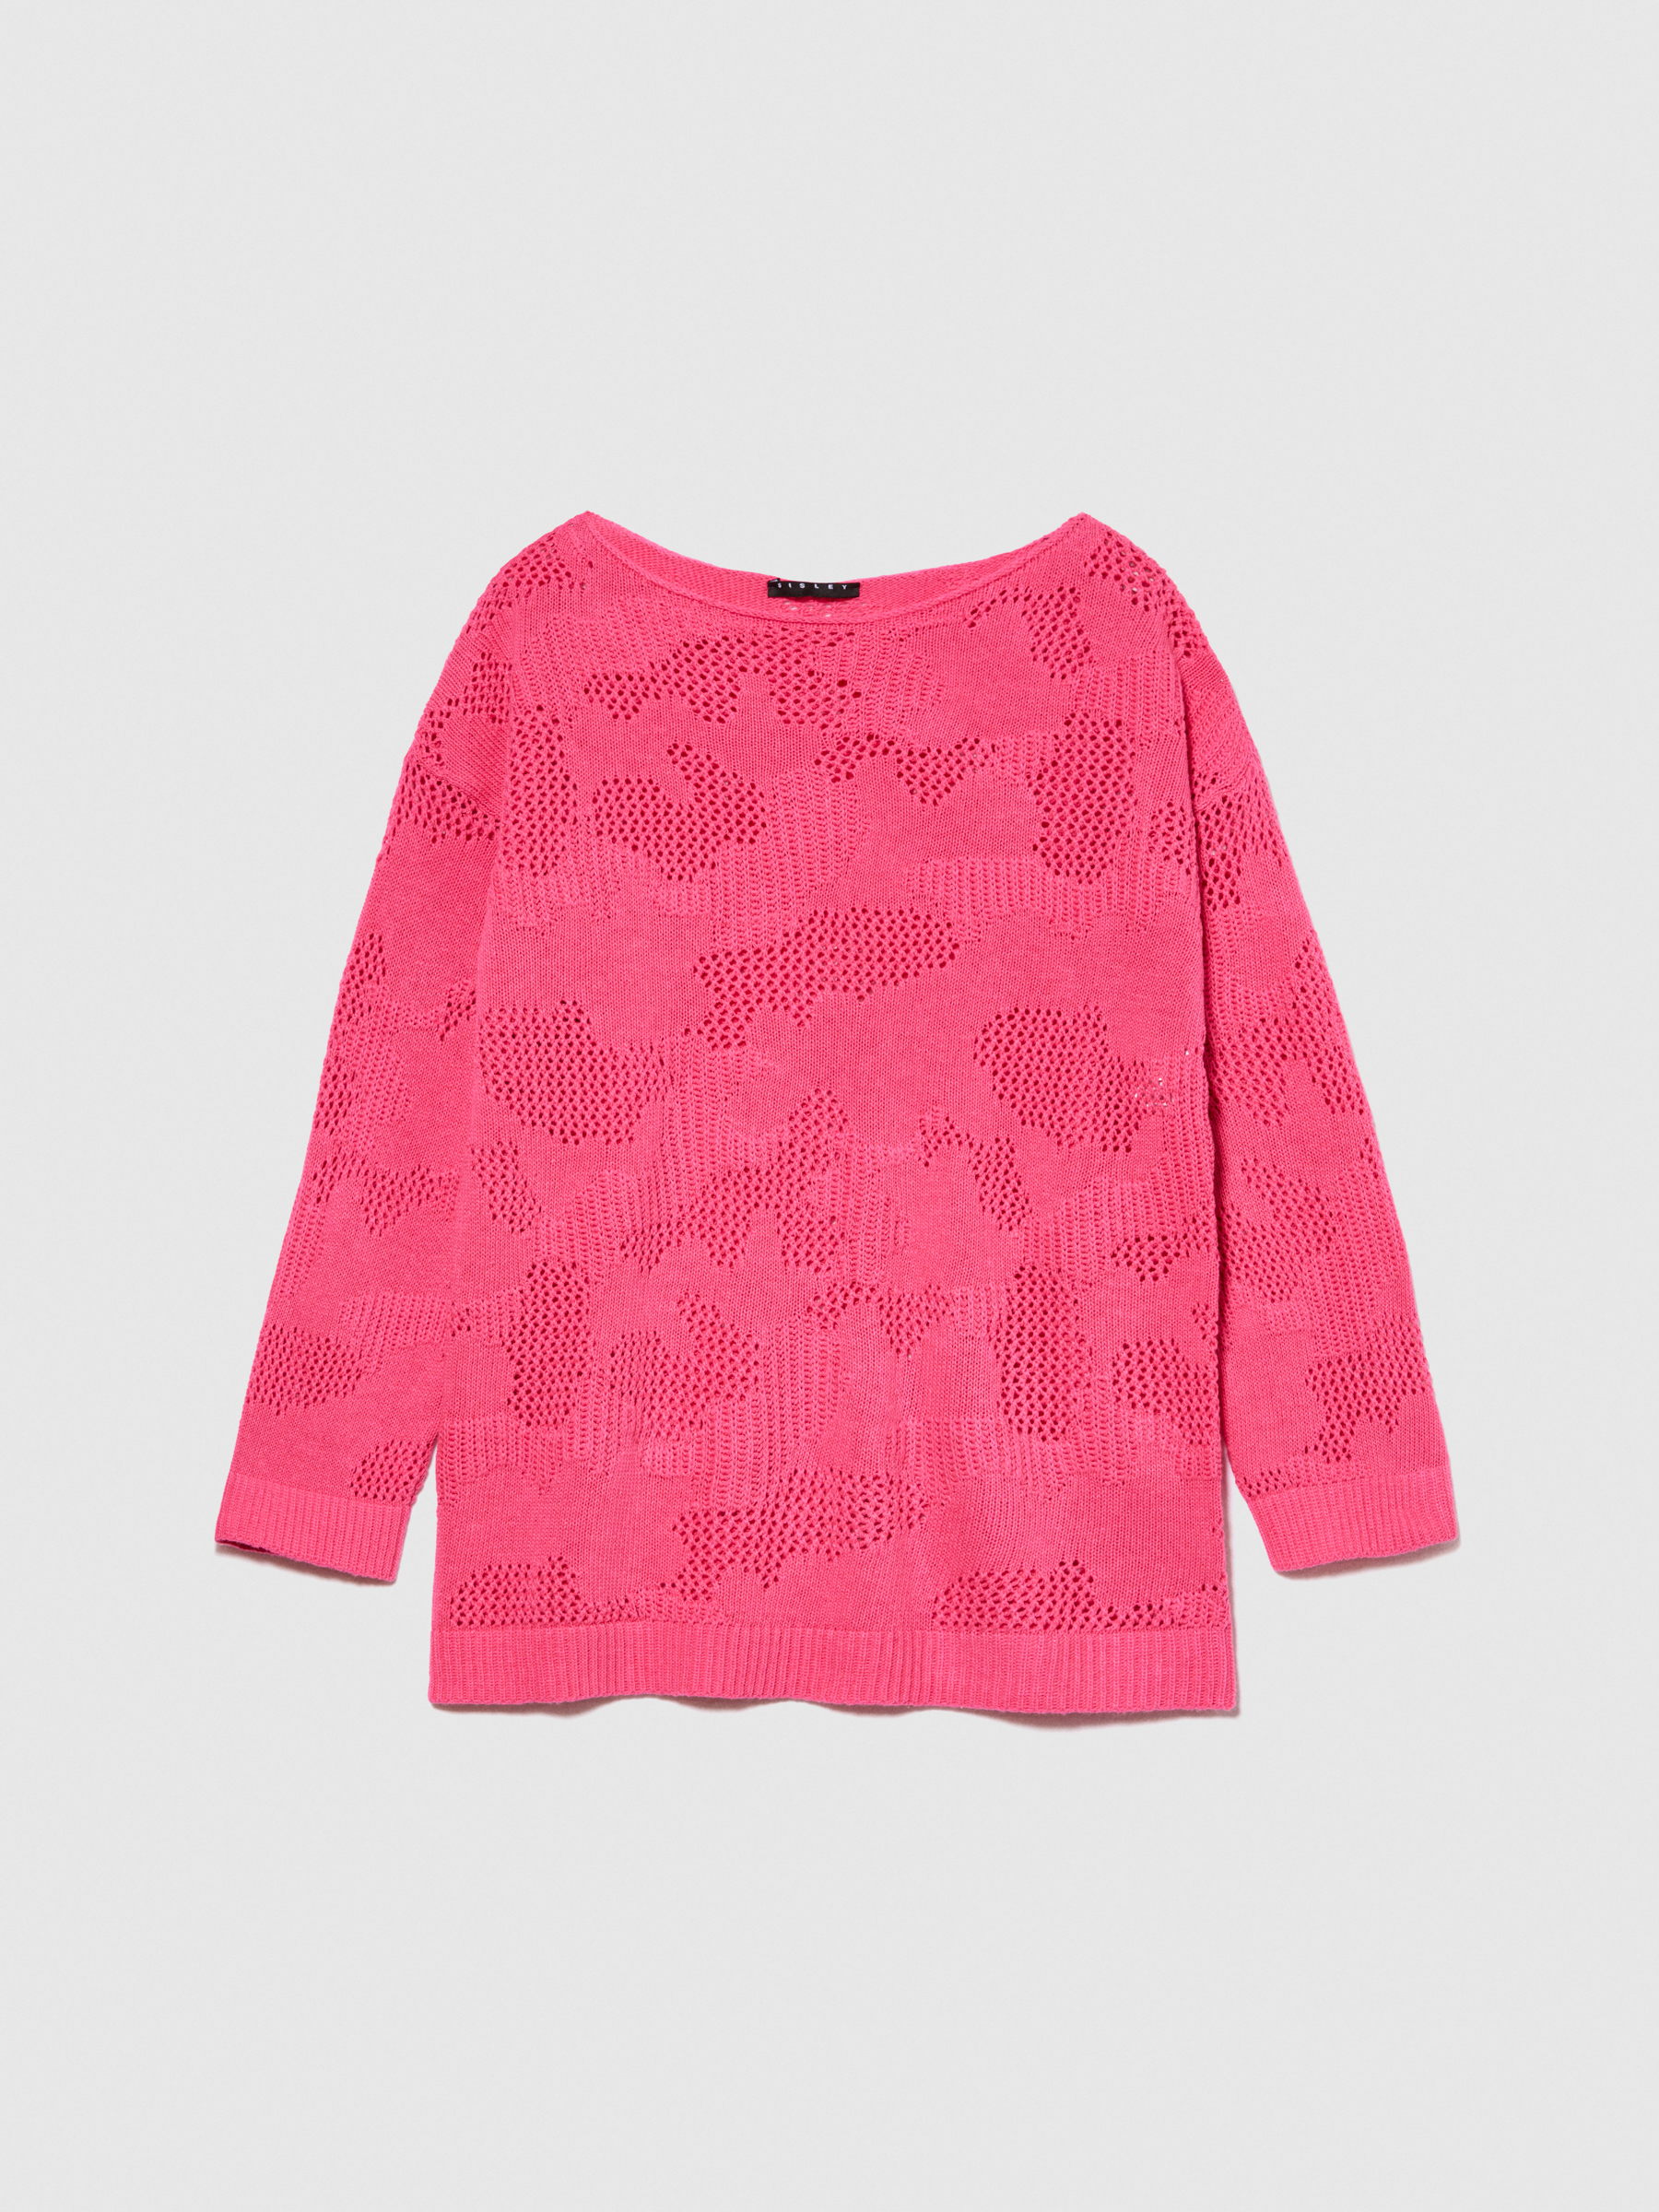 Sisley Young - Oversized Sweater, Woman, Pink, Size: L